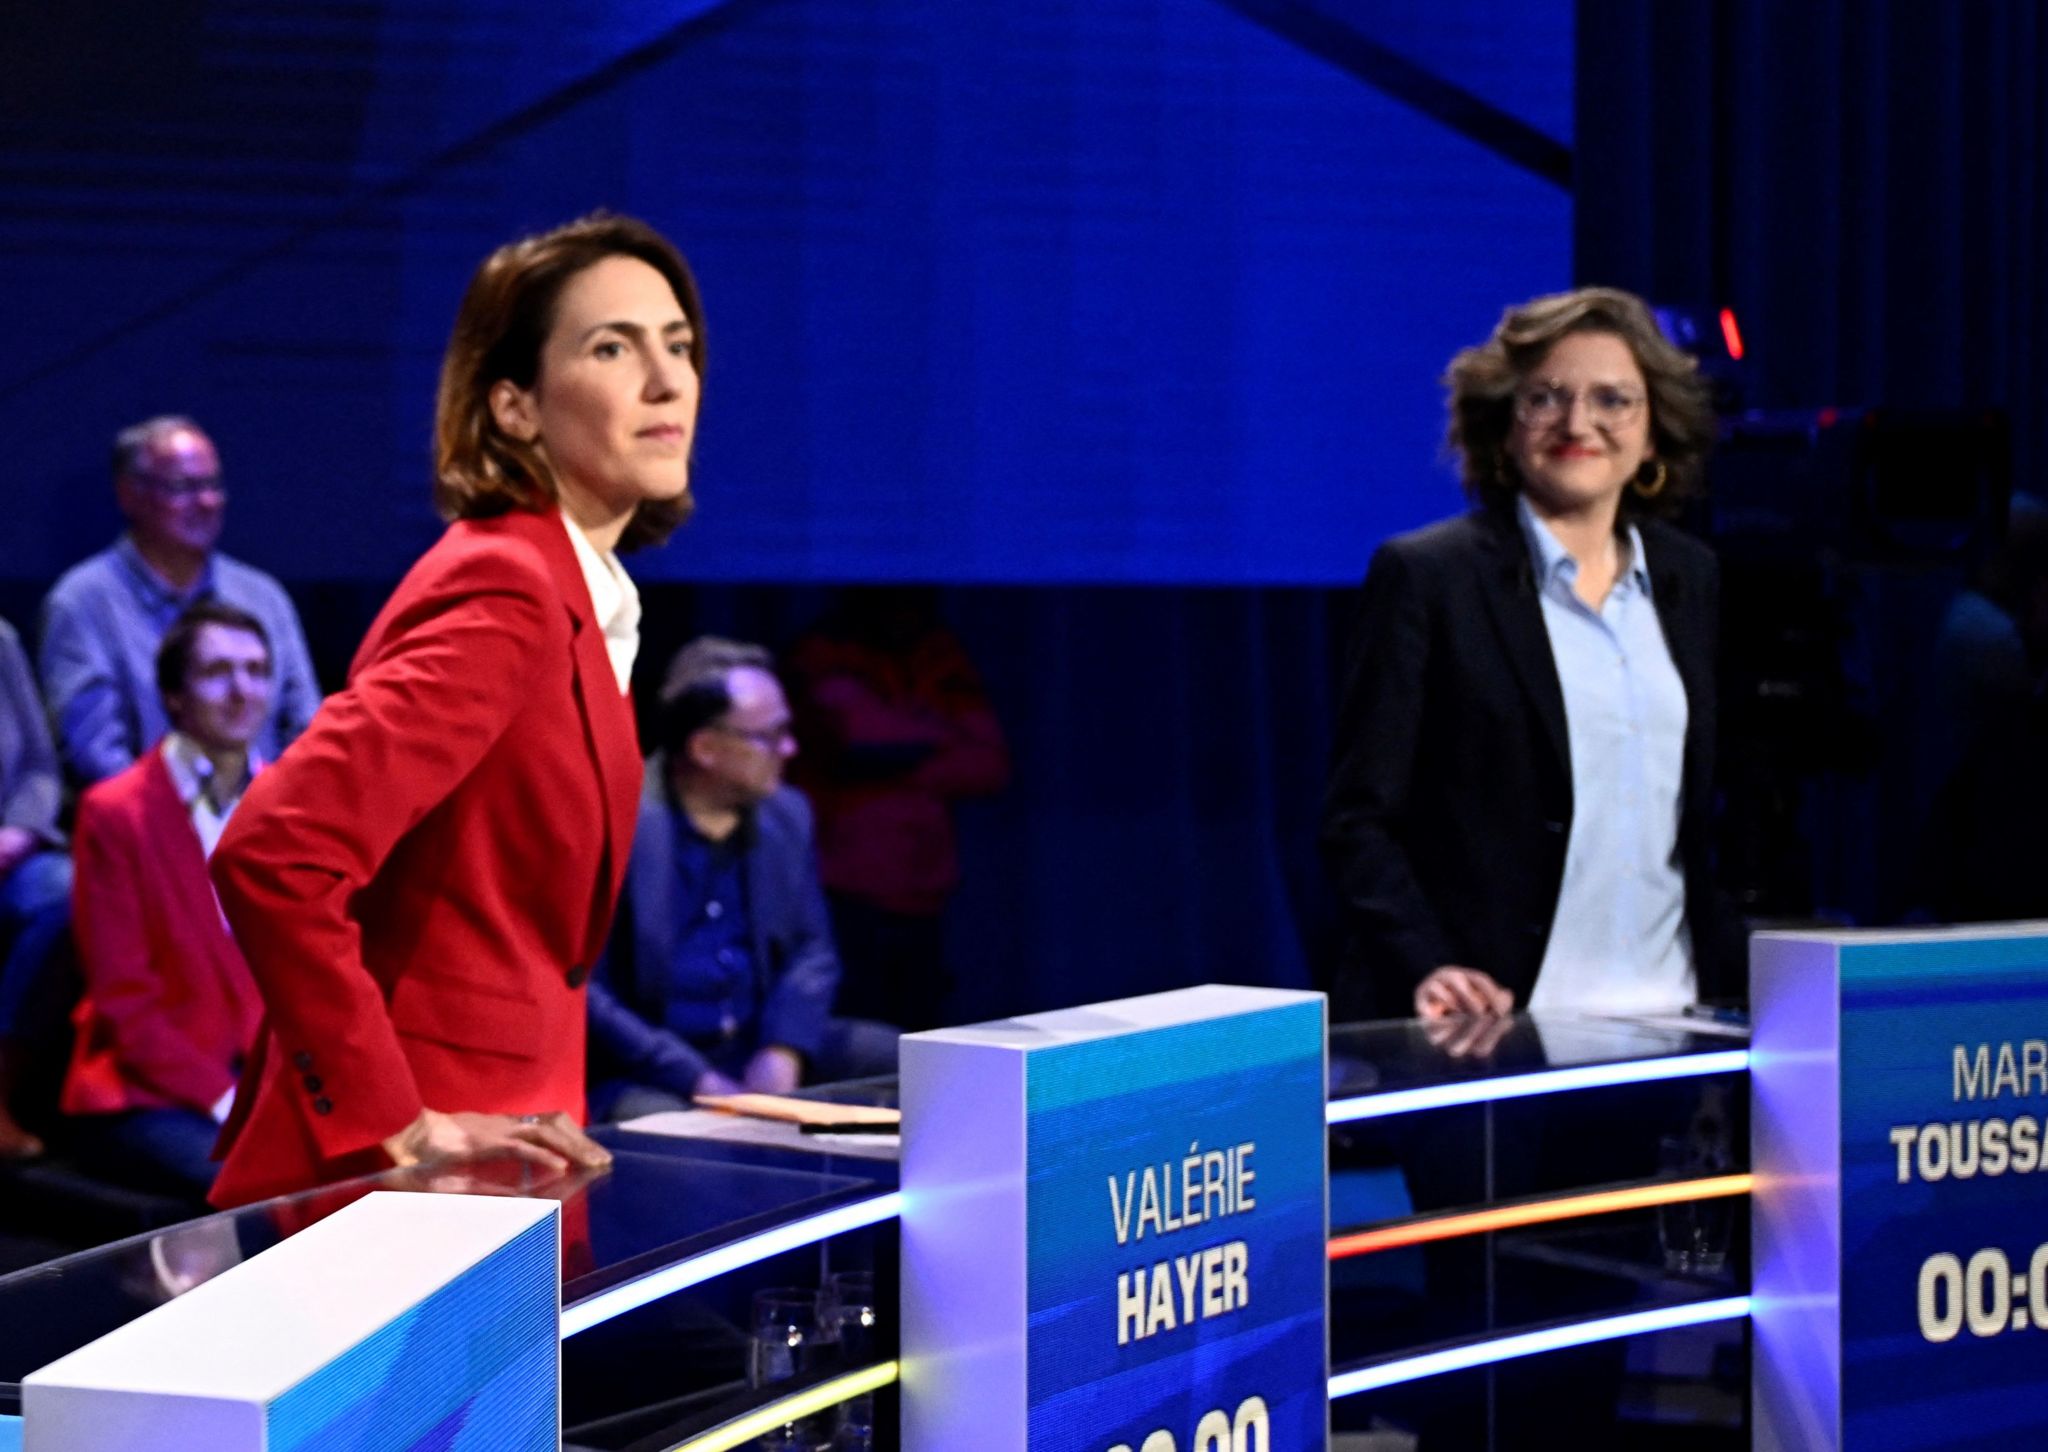 Marie Toussaint (R) at a debate on 27 May with Valérie Hayer